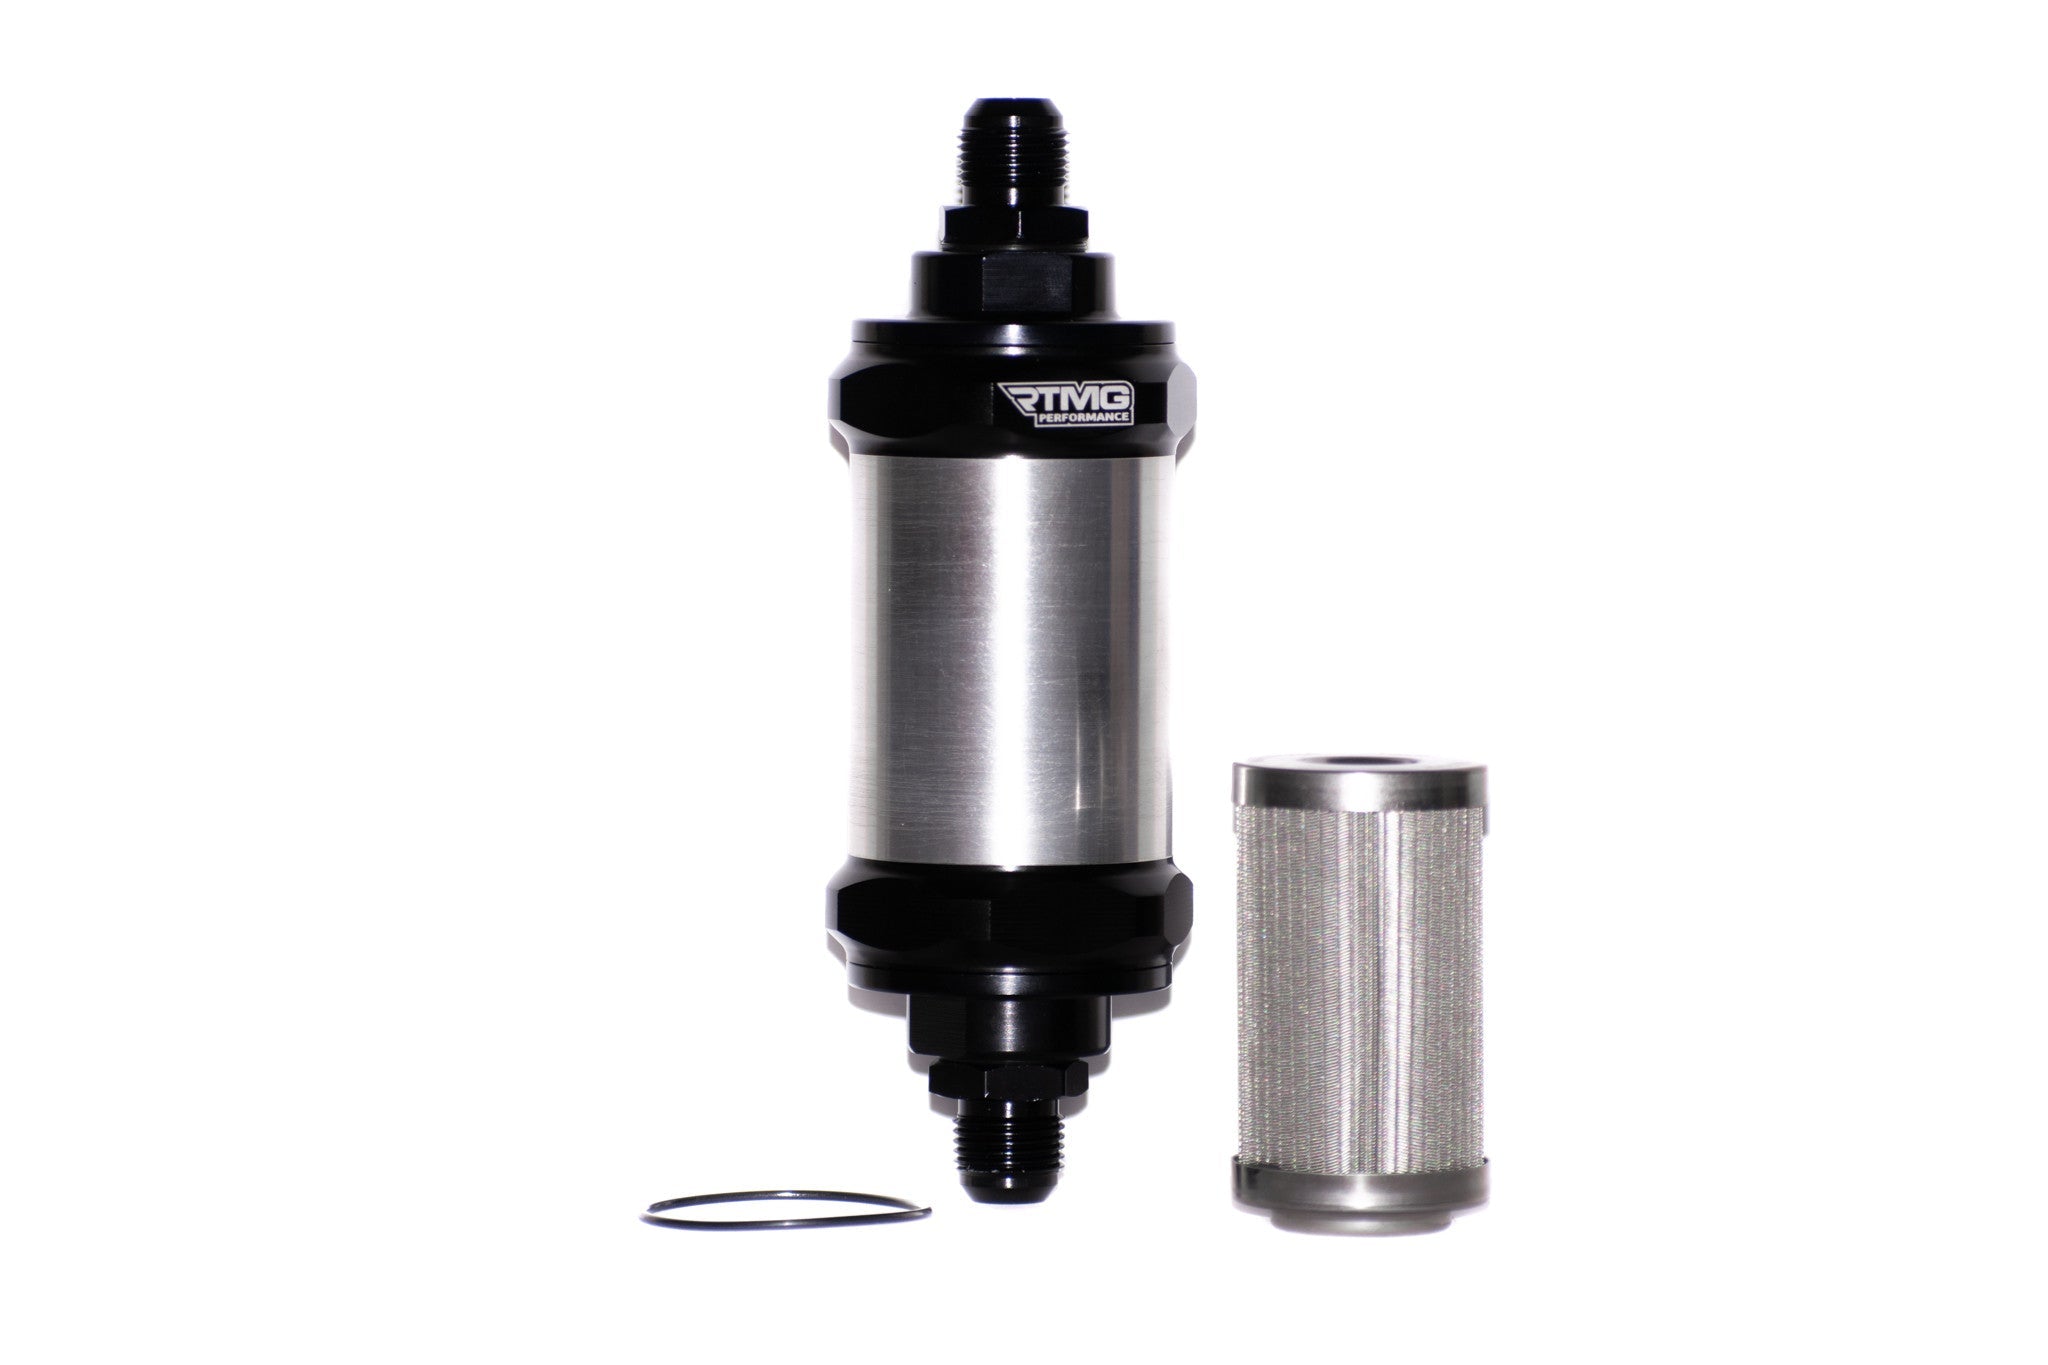 RTMG Universal Racing Fuel Filter Can